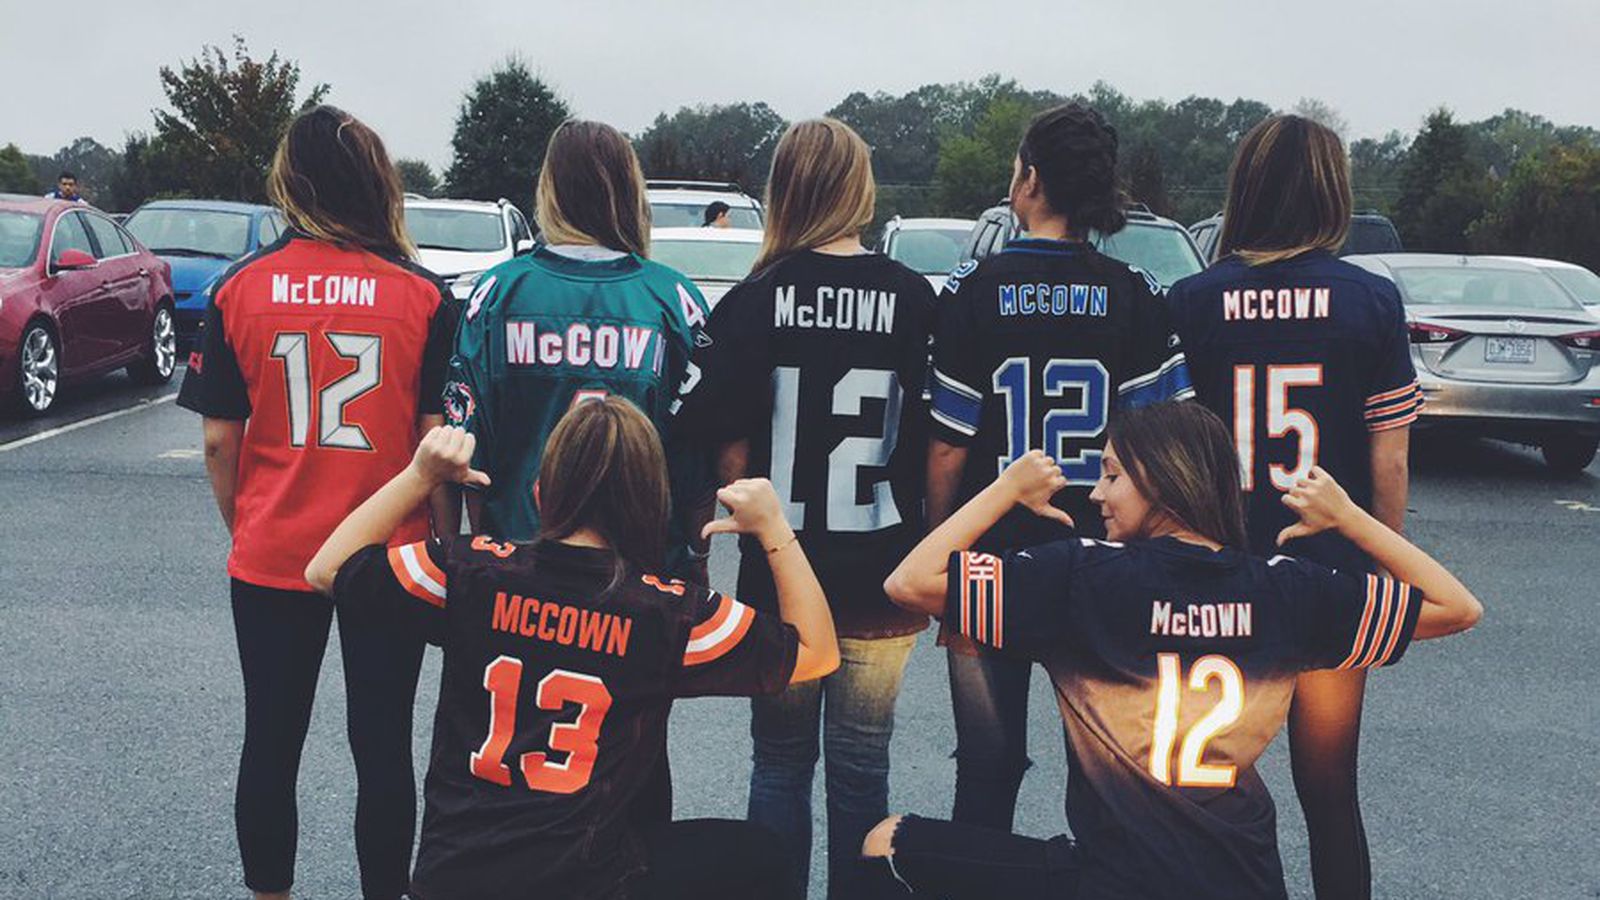 This is what happens when you're Josh McCown's daughter and it's jersey